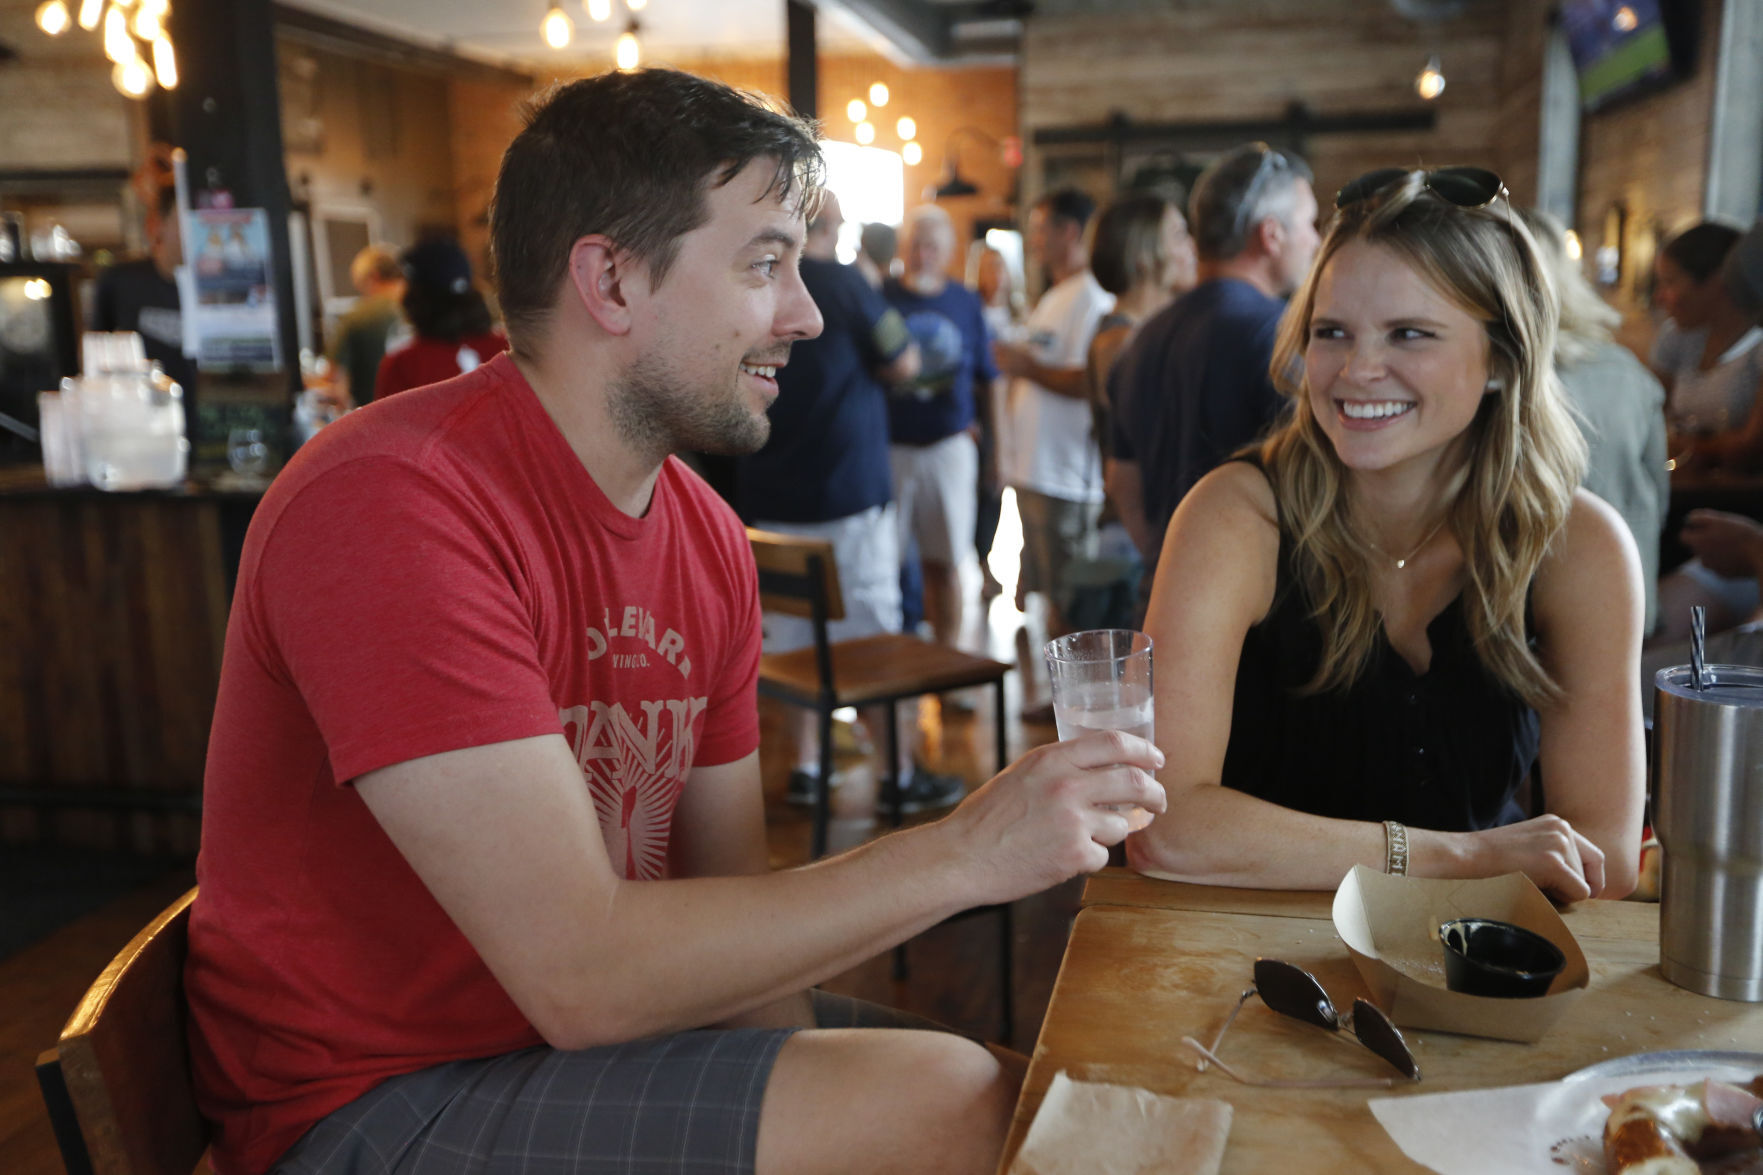 Dave and Diana Ackerman, of Bloomington, Minn., enjoy some food and drinks at Textile Brewing Company on Wednesday in Dyersville, Iowa.    PHOTO CREDIT: Paul Kurutsides